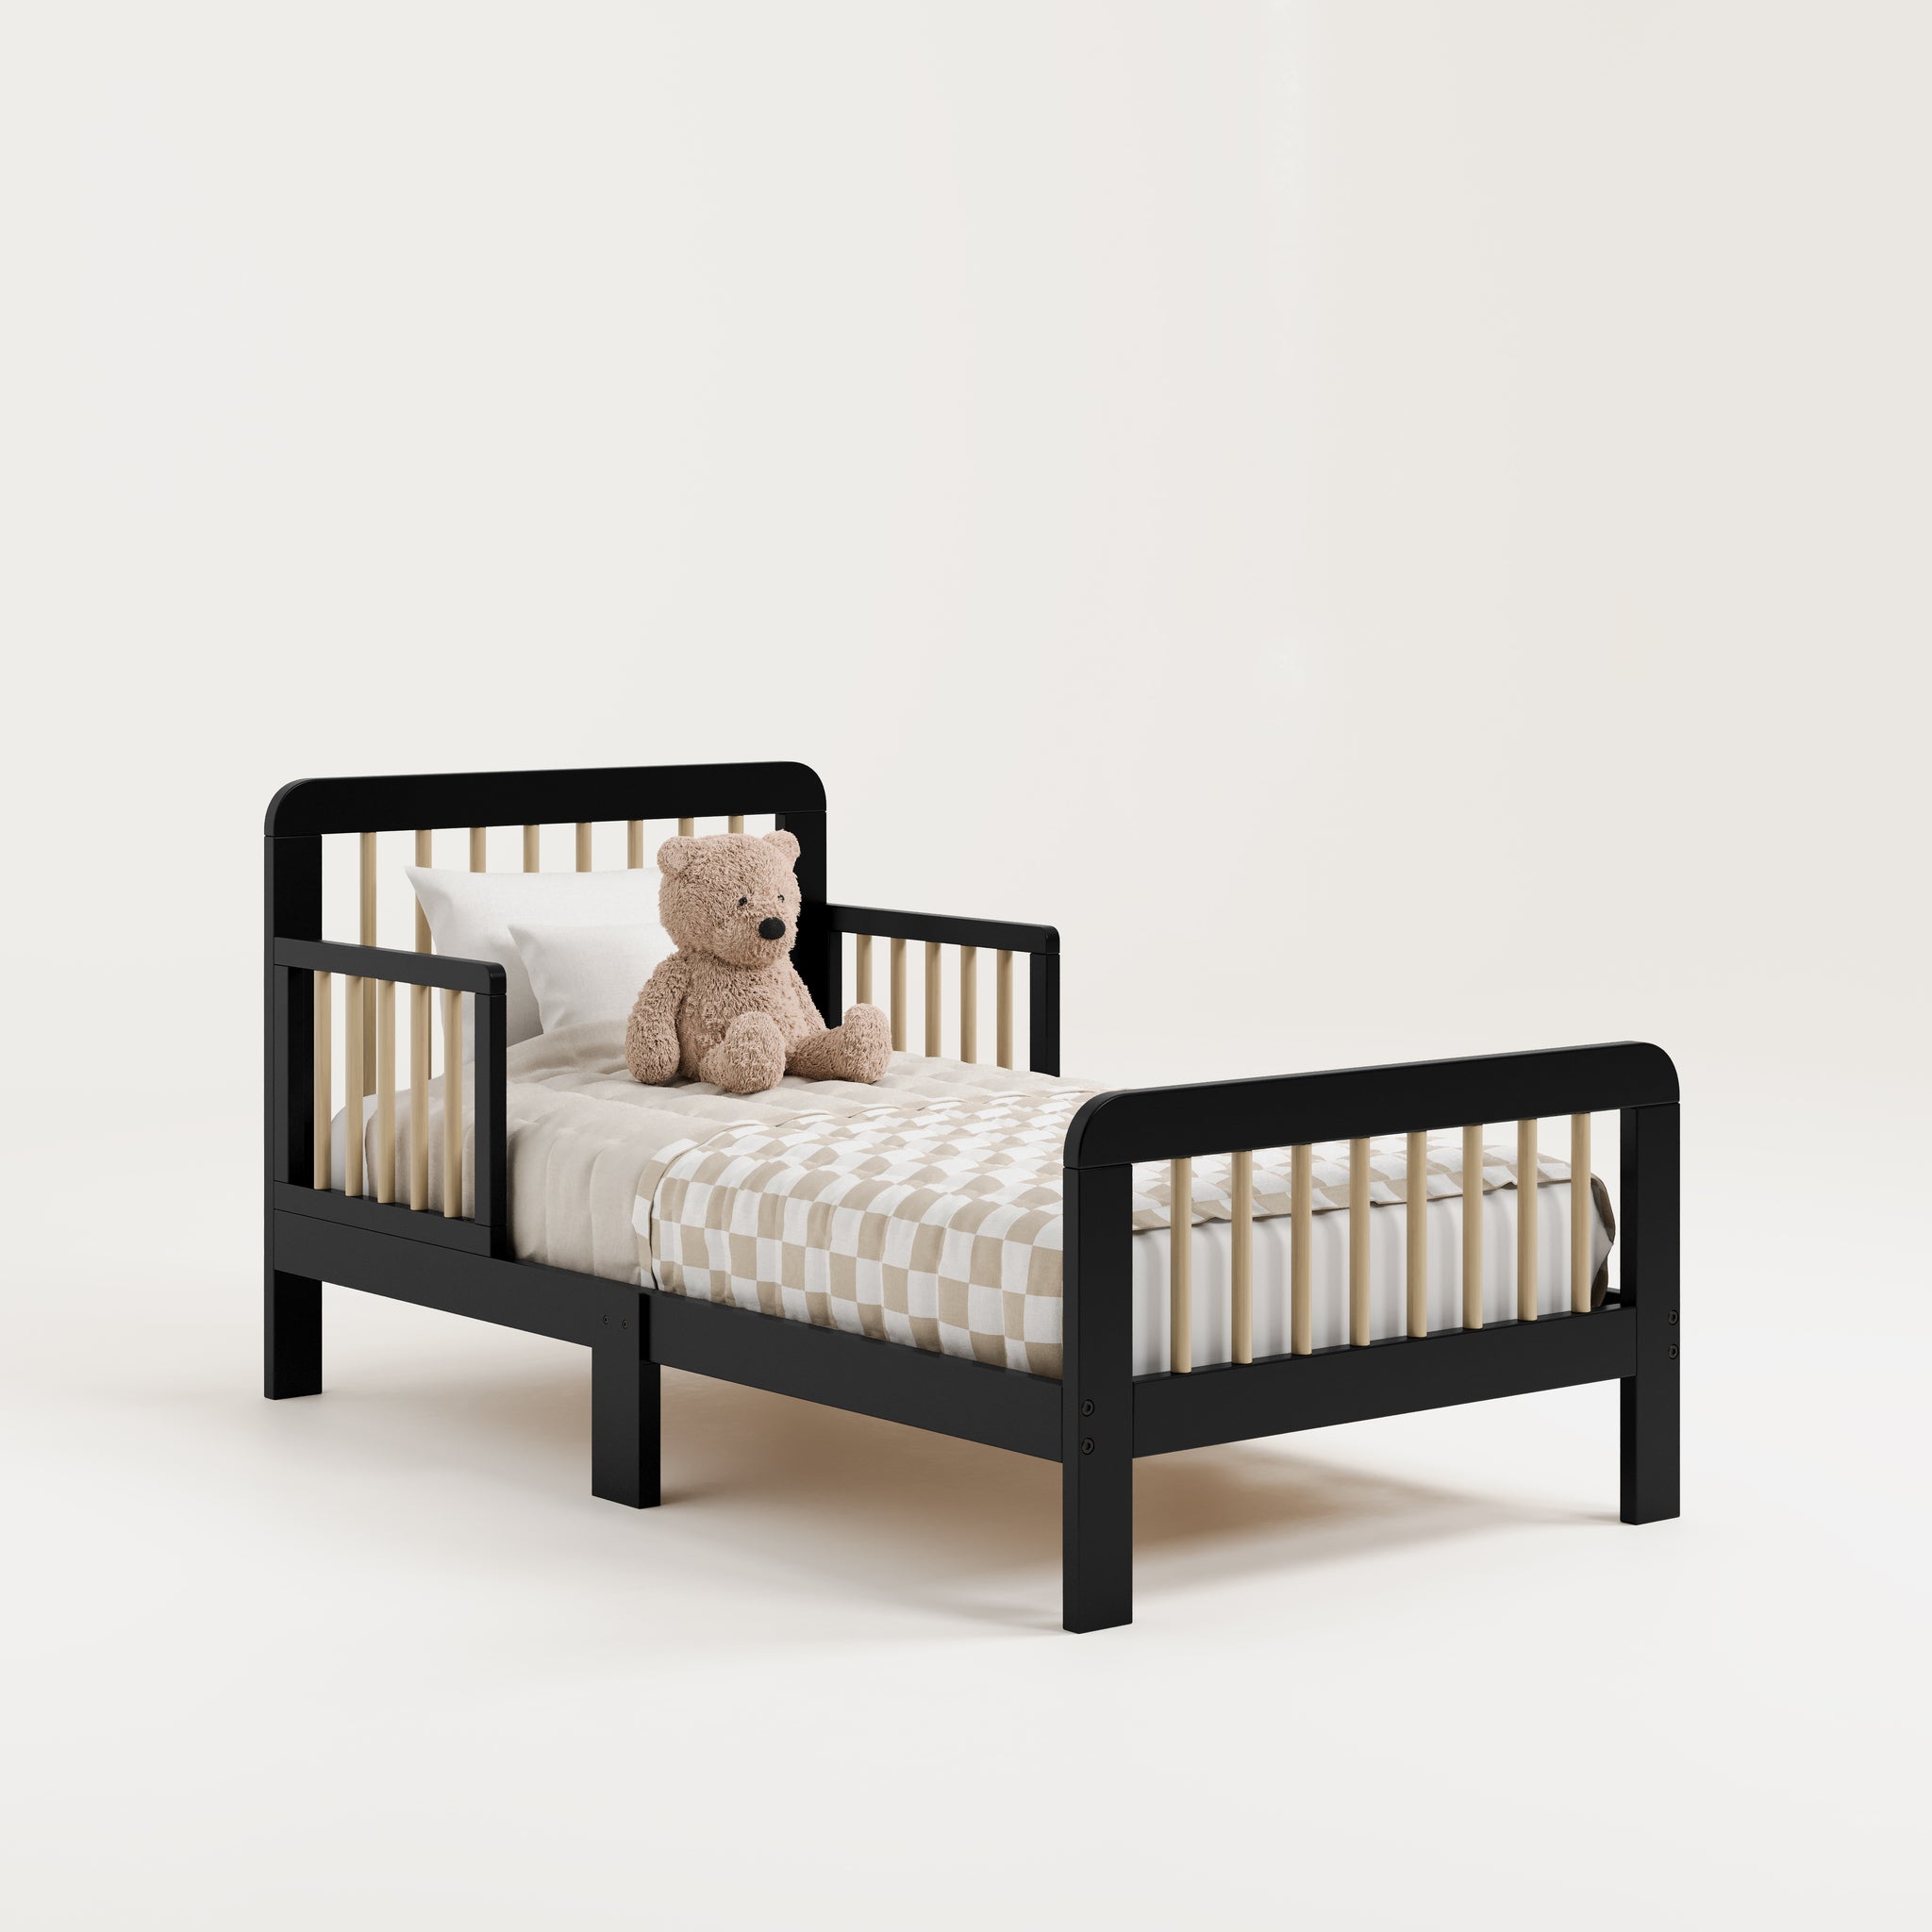 Angled view of a black toddler bed with driftwood finish with bedding and teddy bear